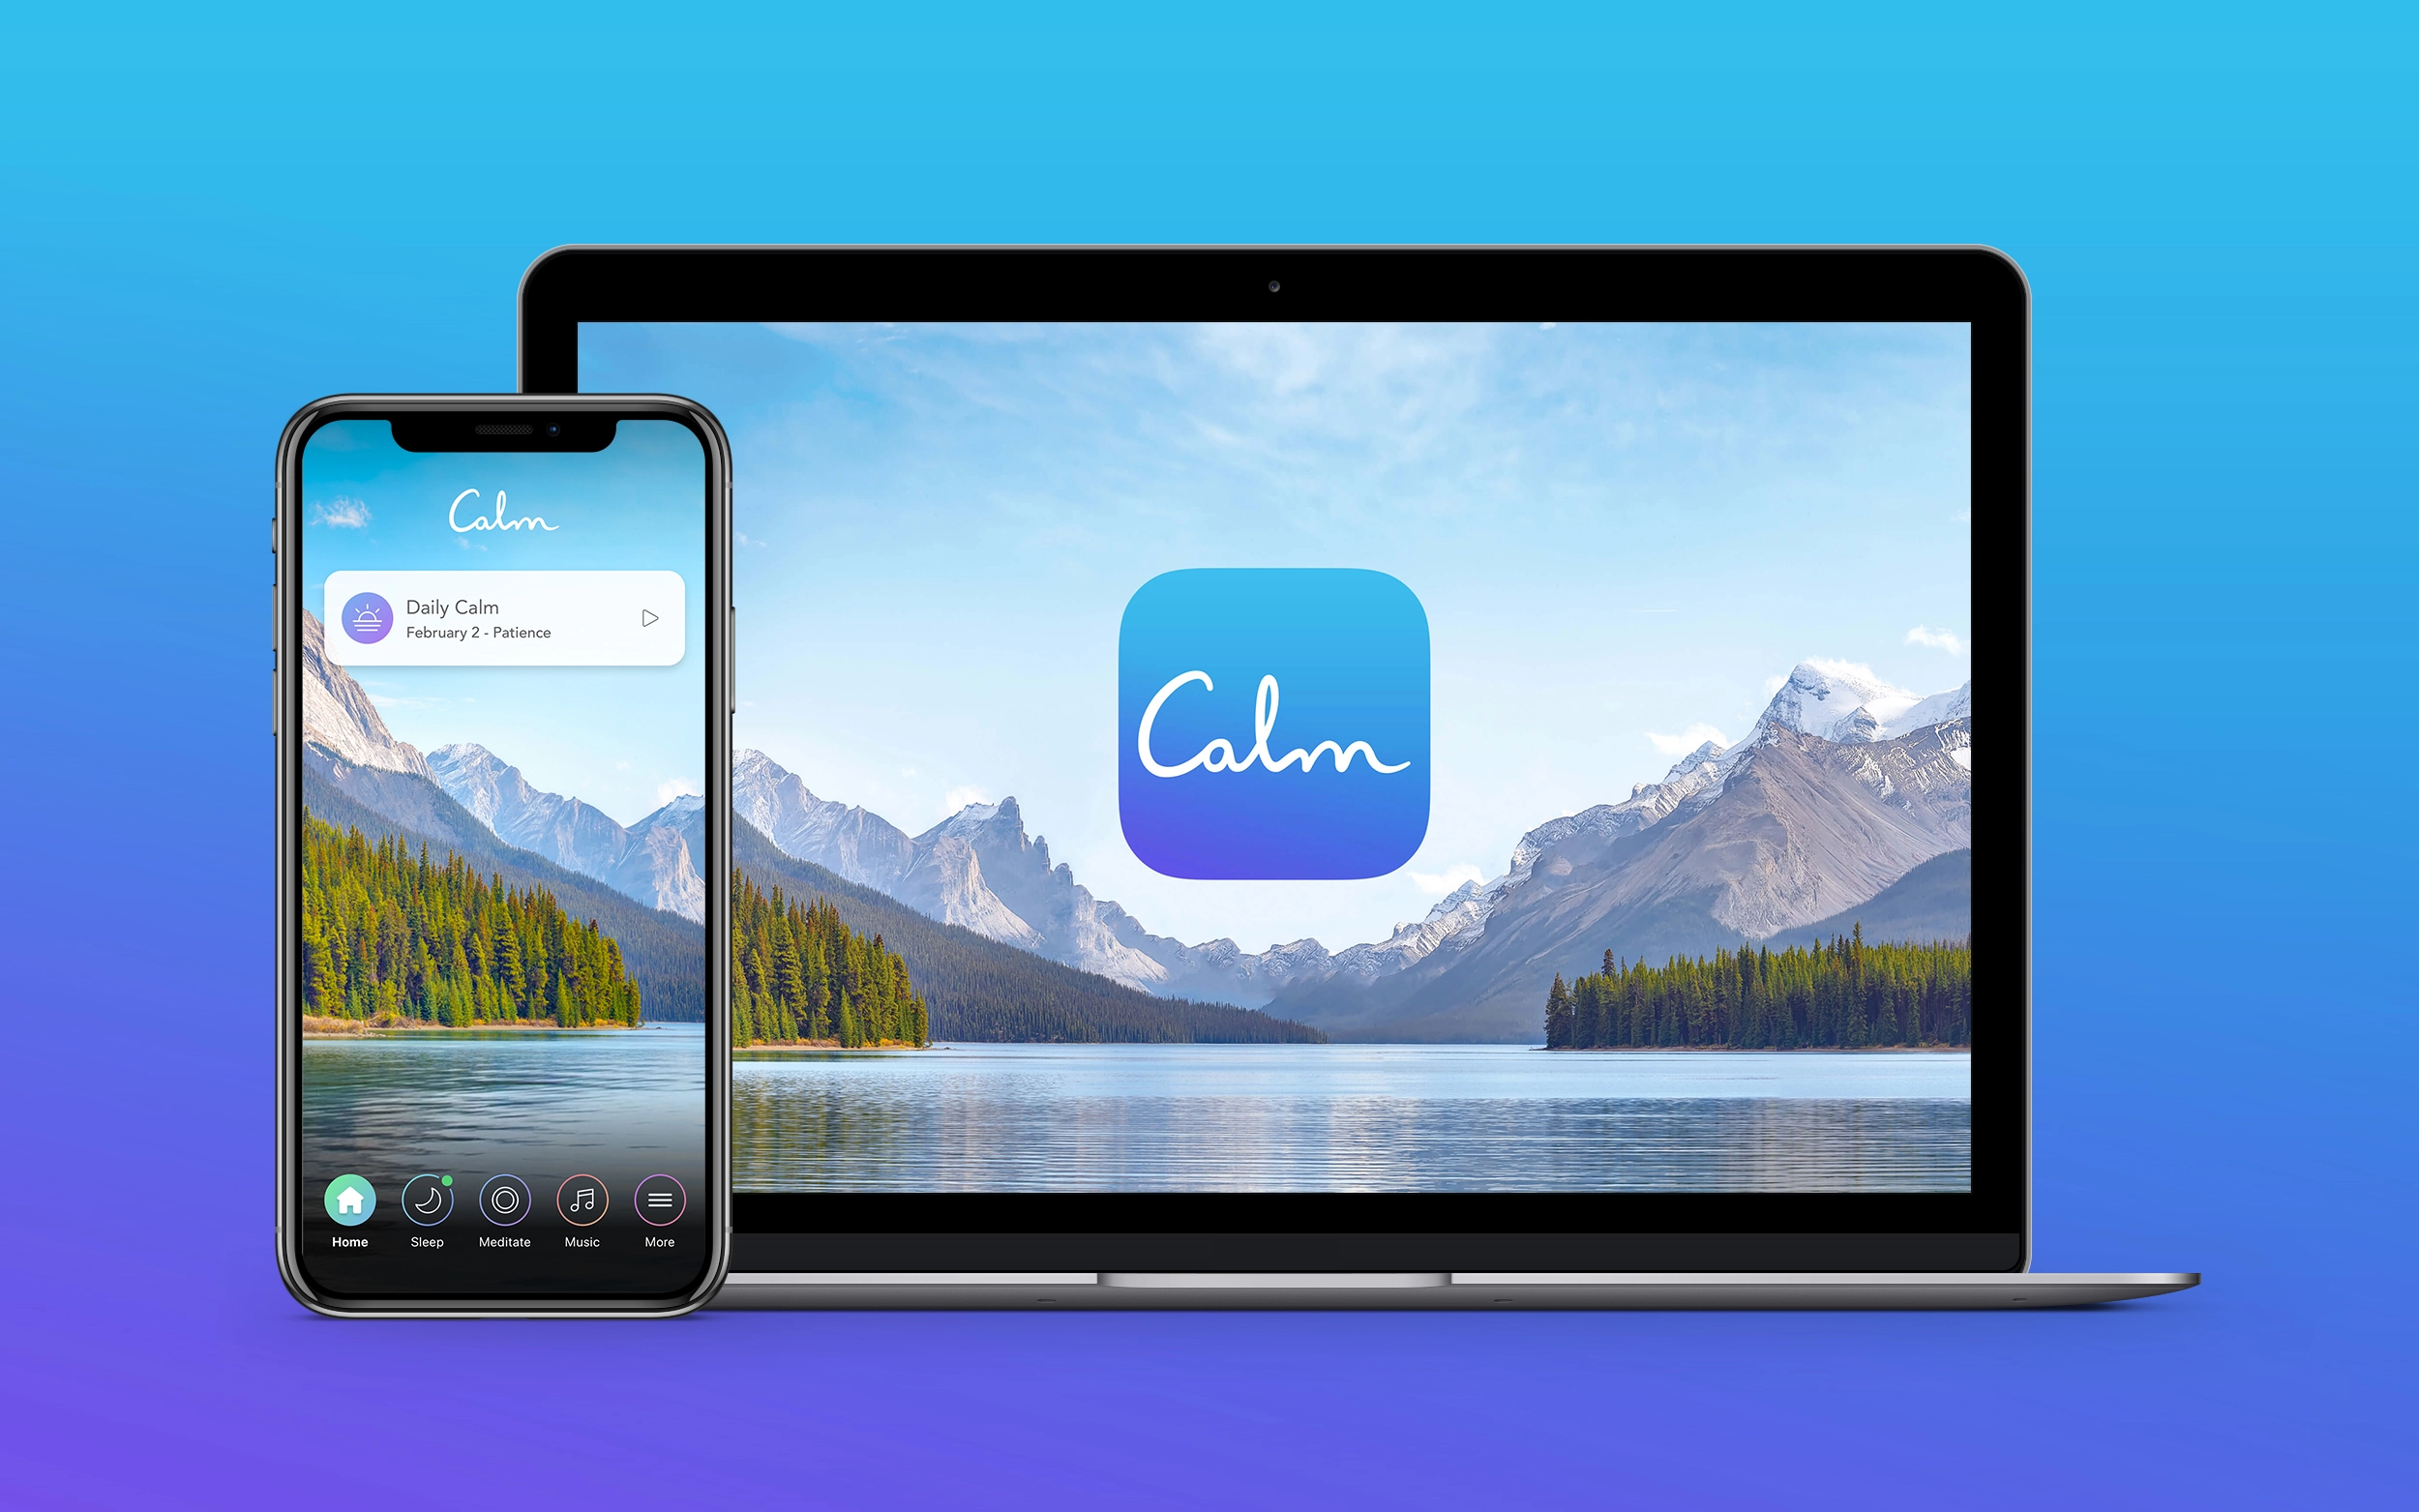 Calm Premium - 3 Months Trial Subscription Key (ONLY FOR NEW ACCOUNTS), $0.8